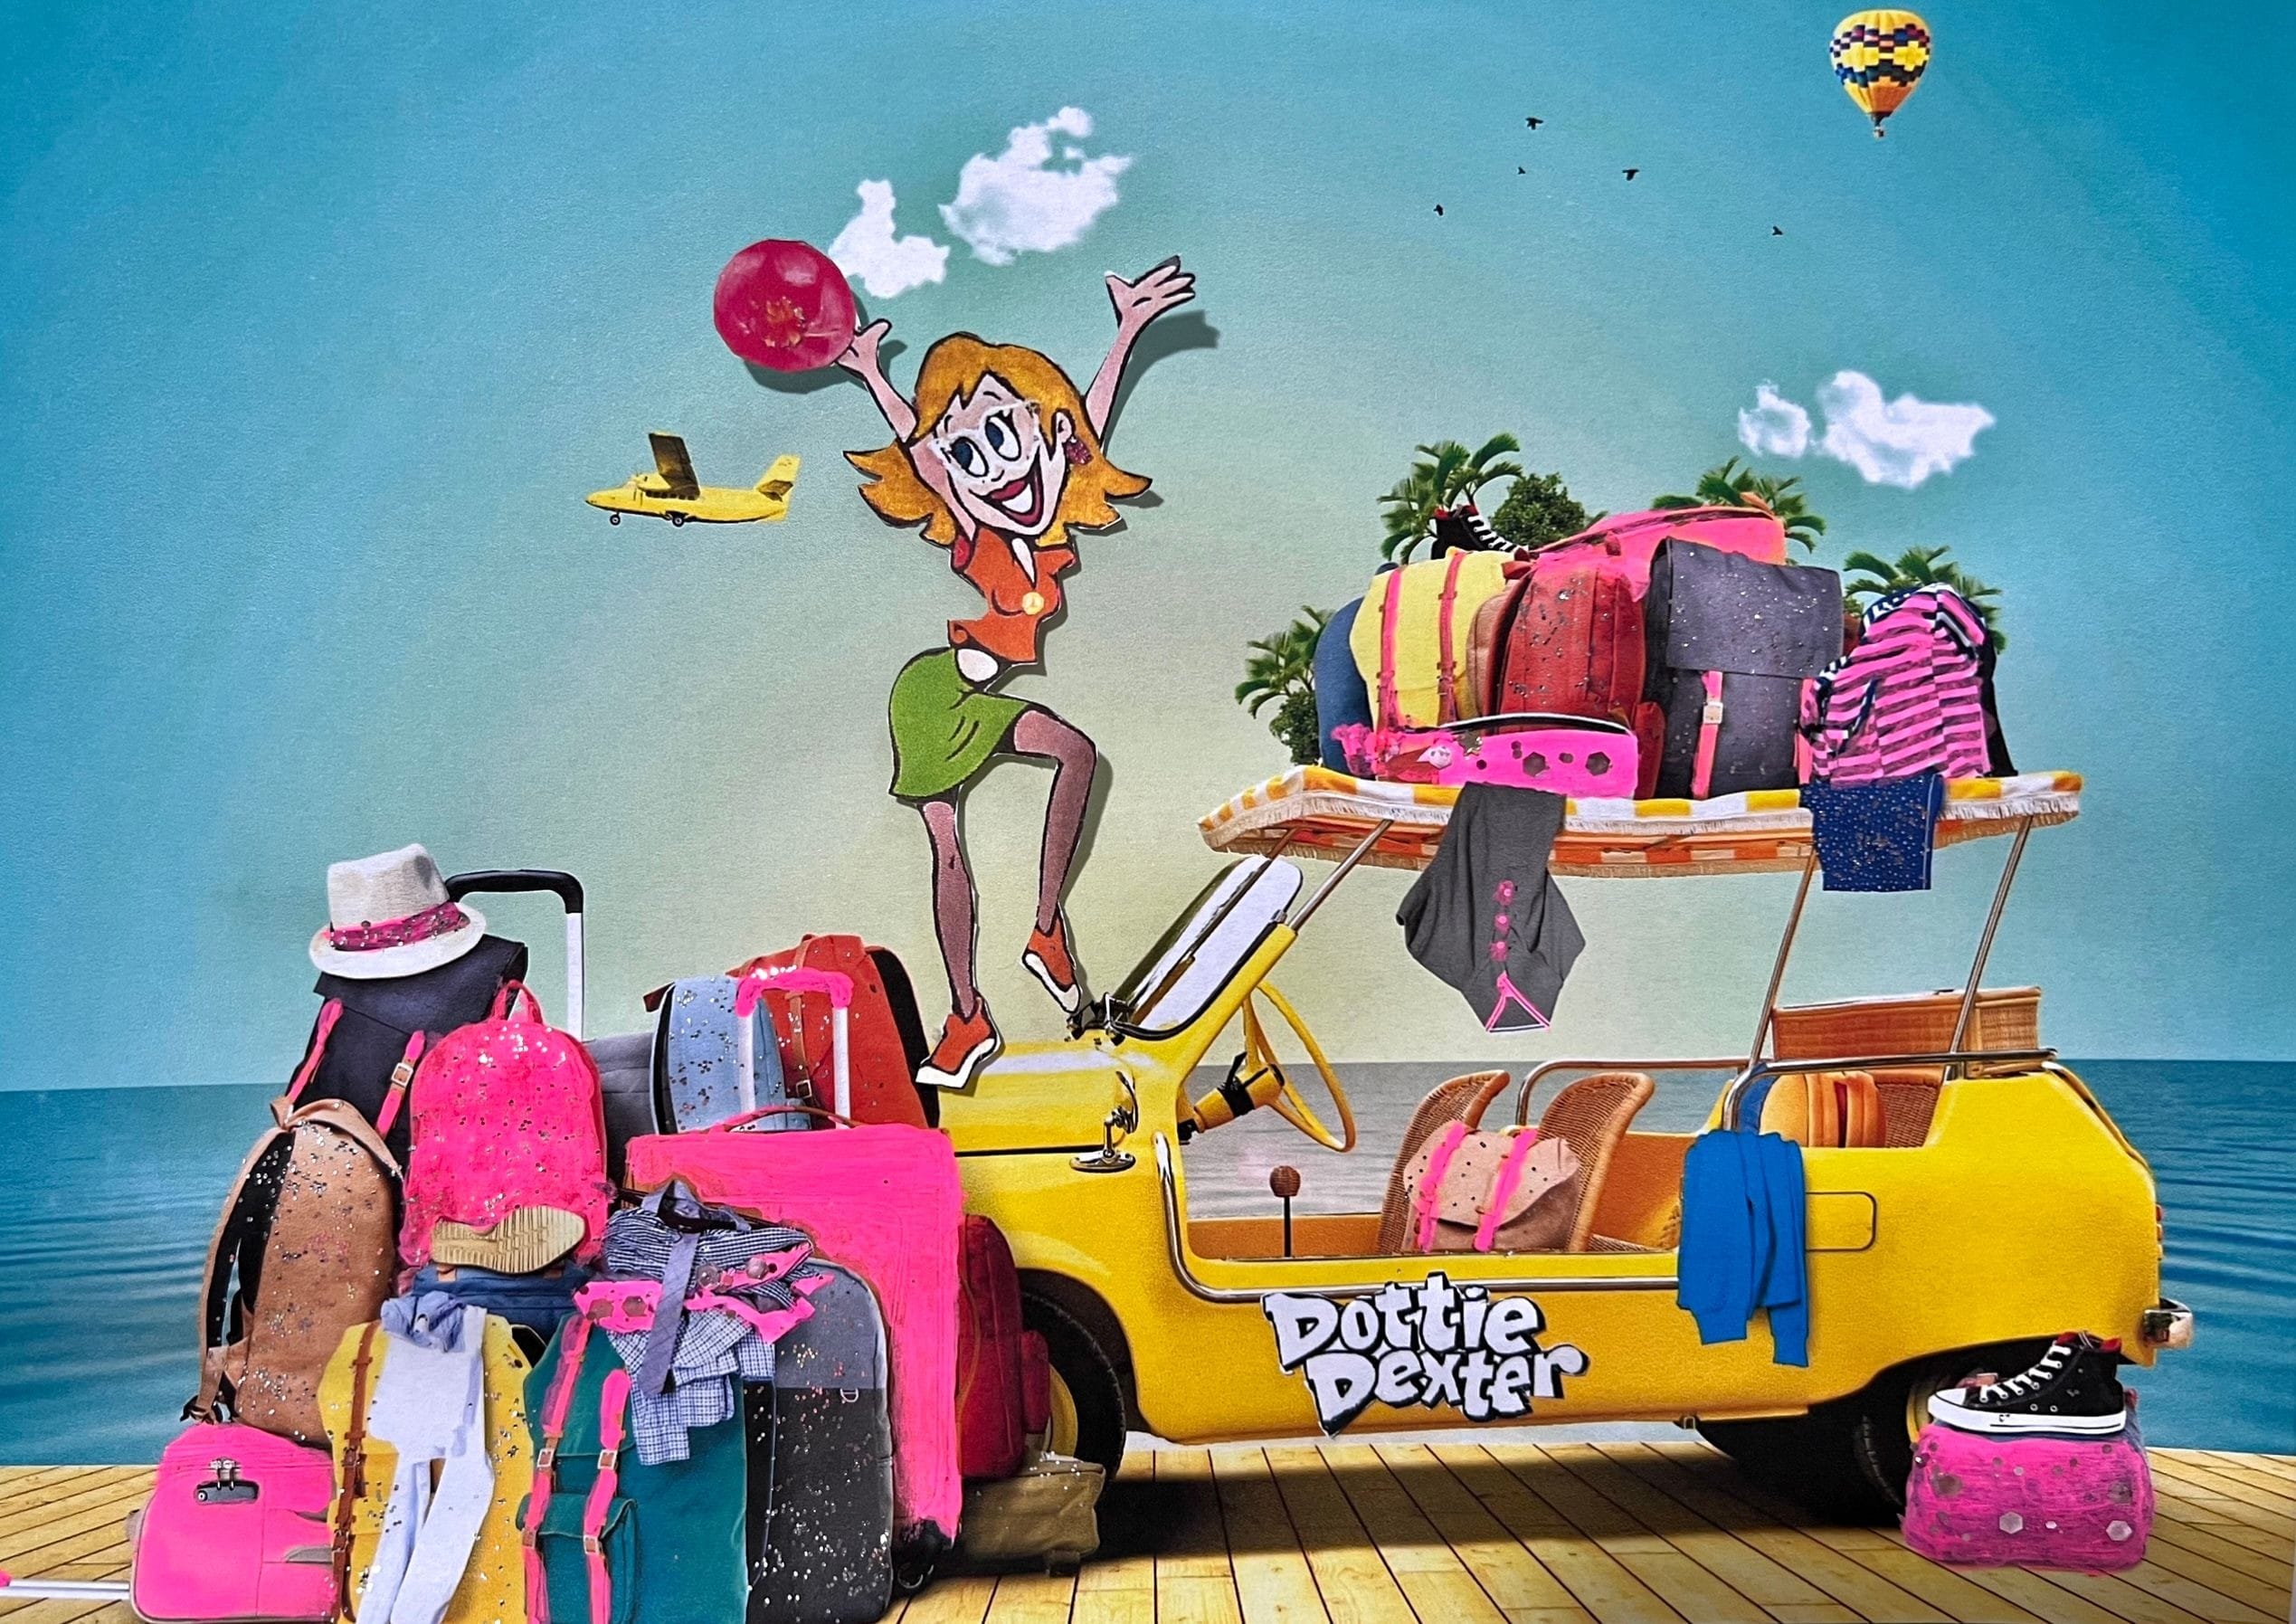 Dottie Dexter travels cross country & the world to audition for her Talk Show job at HULU, Lionsgate studios. Pink suitcase, plane, luggage, dance walking tours